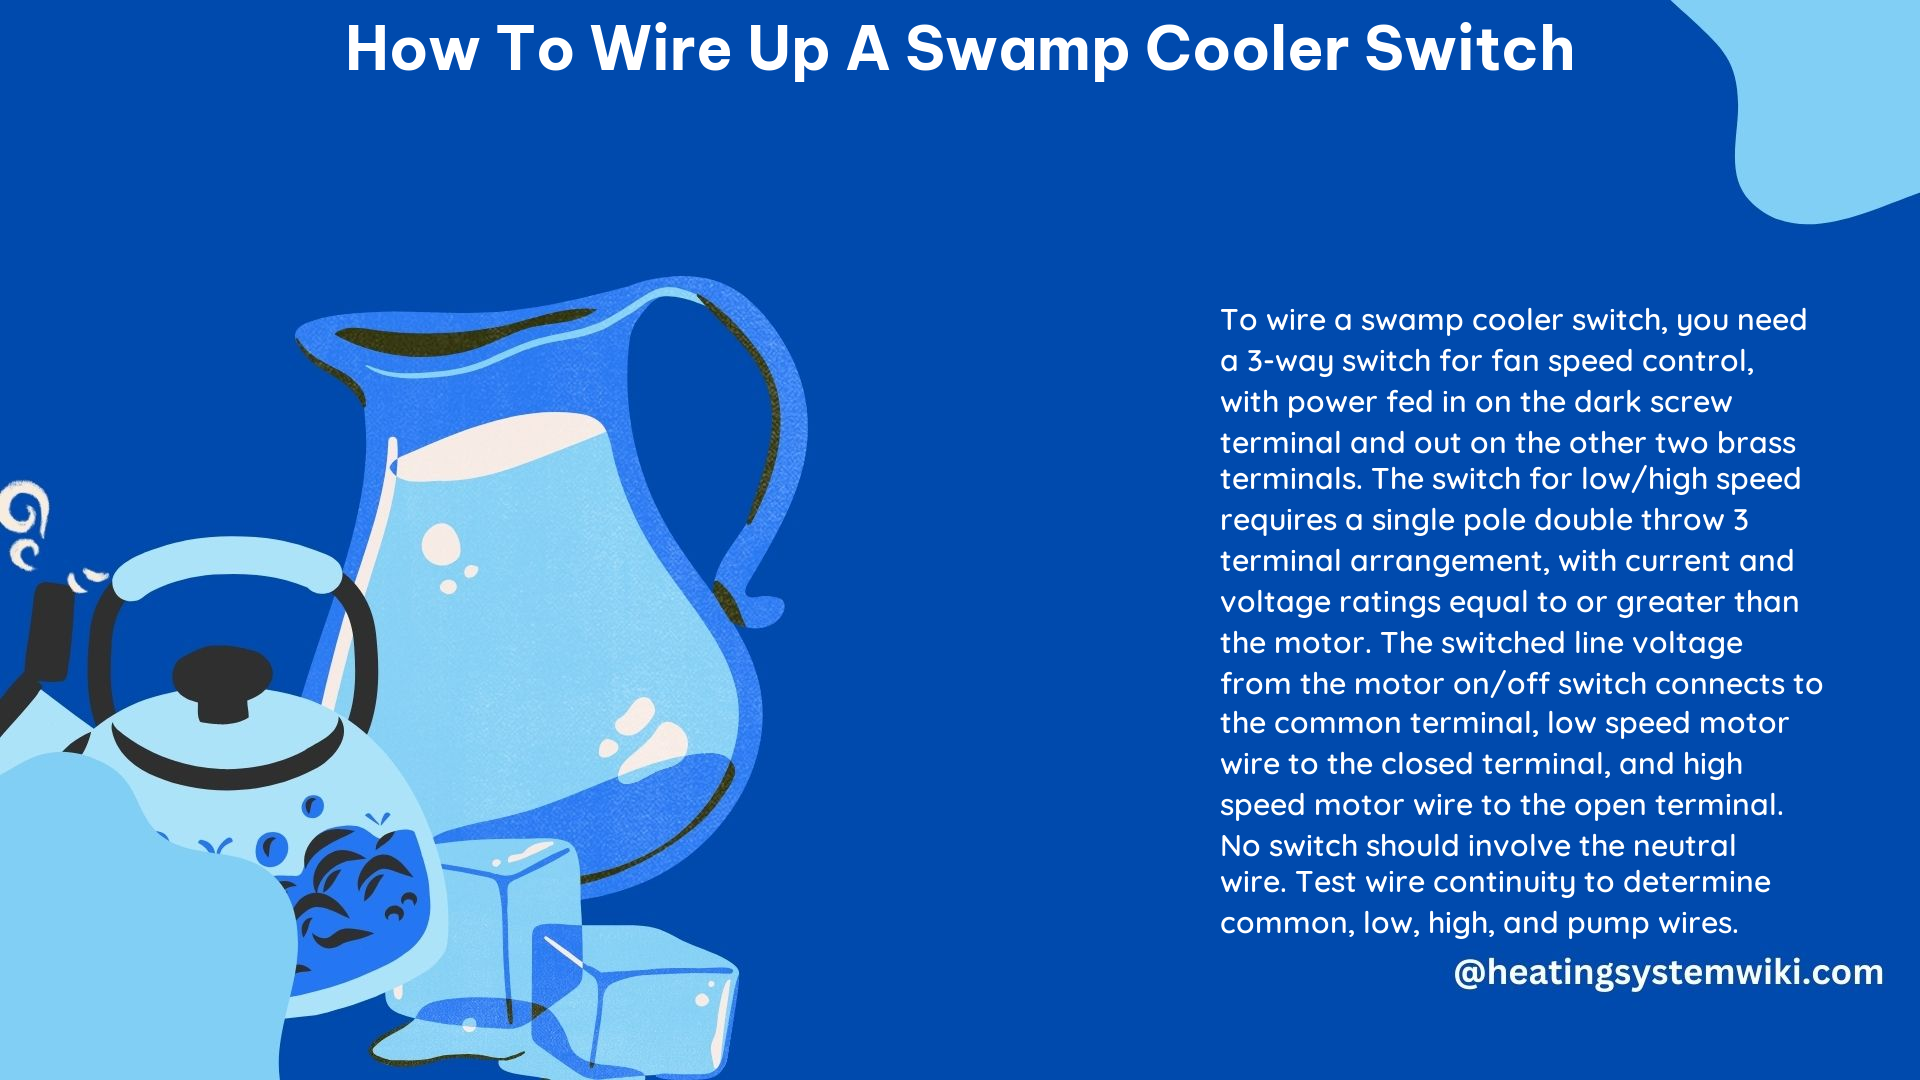 How to Wire up a Swamp Cooler Switch